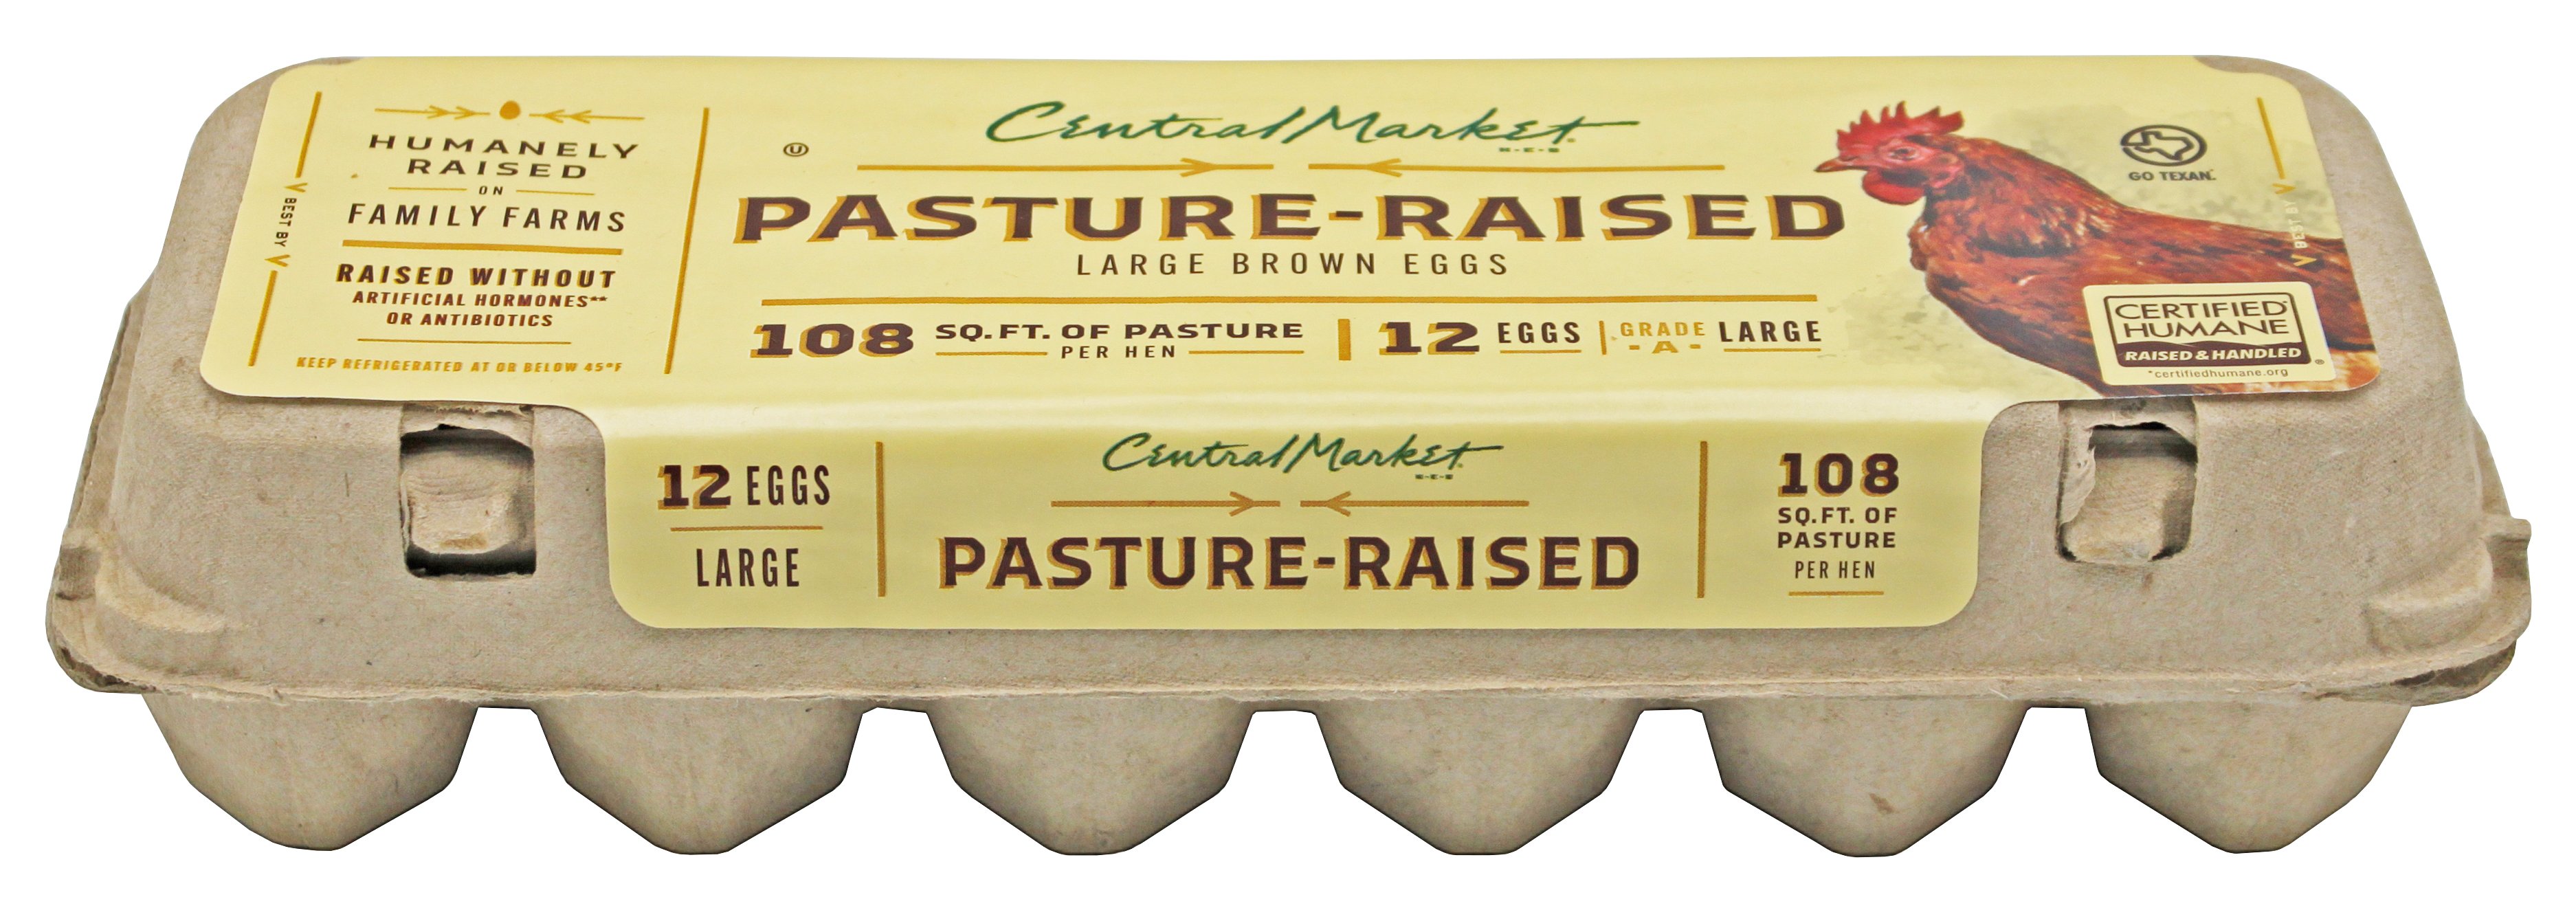 Central Market Pasture Raised Large Brown Eggs Shop Eggs And Egg Substitutes At H E B 